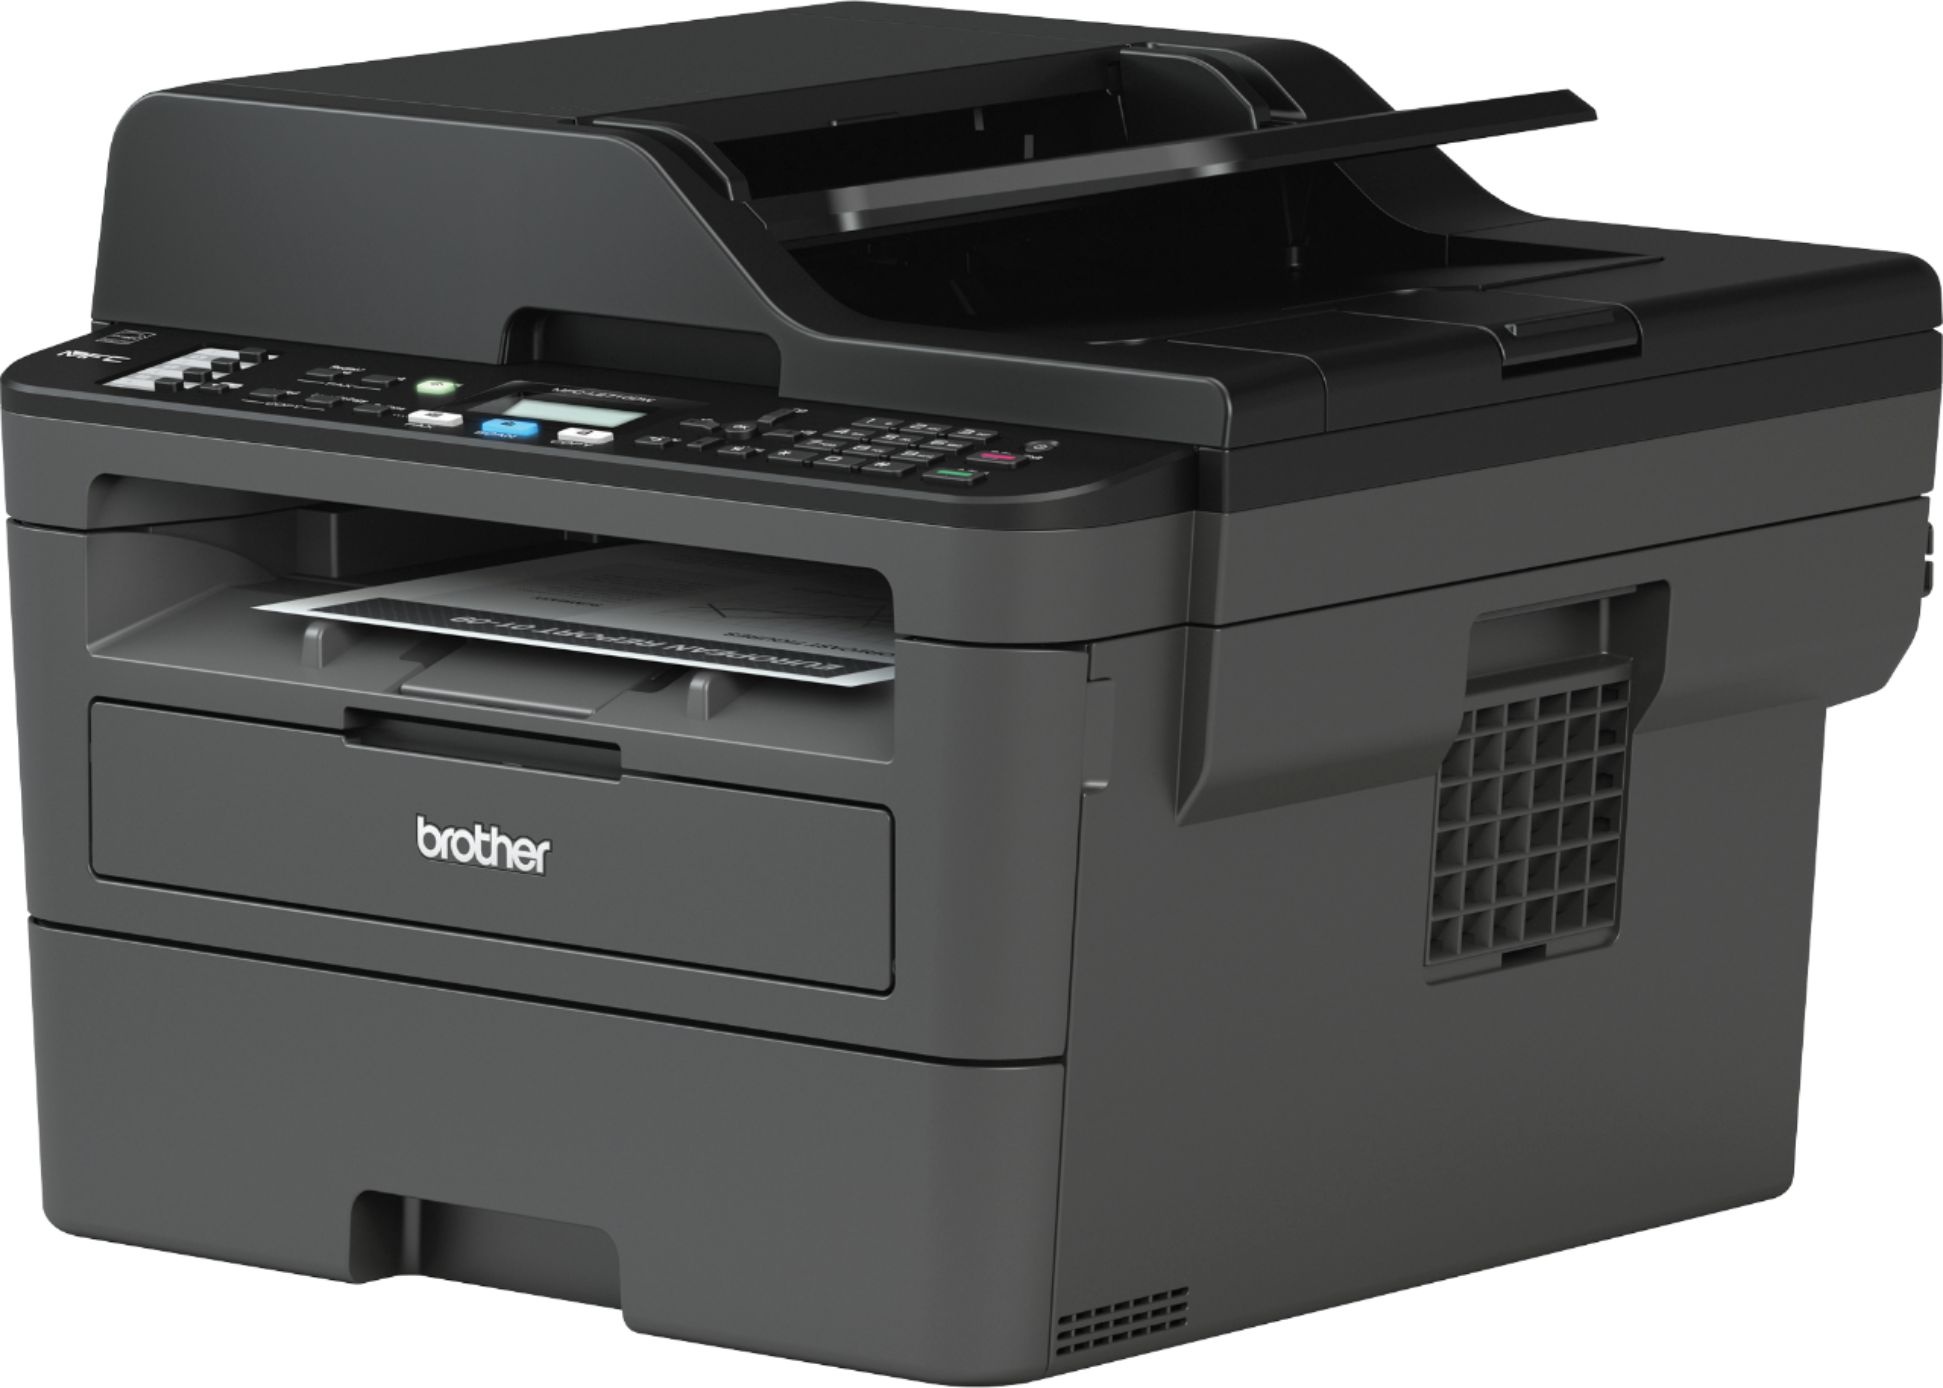 BROTHER DCP-L2620DW 3-in-1 Mono Laser Printer